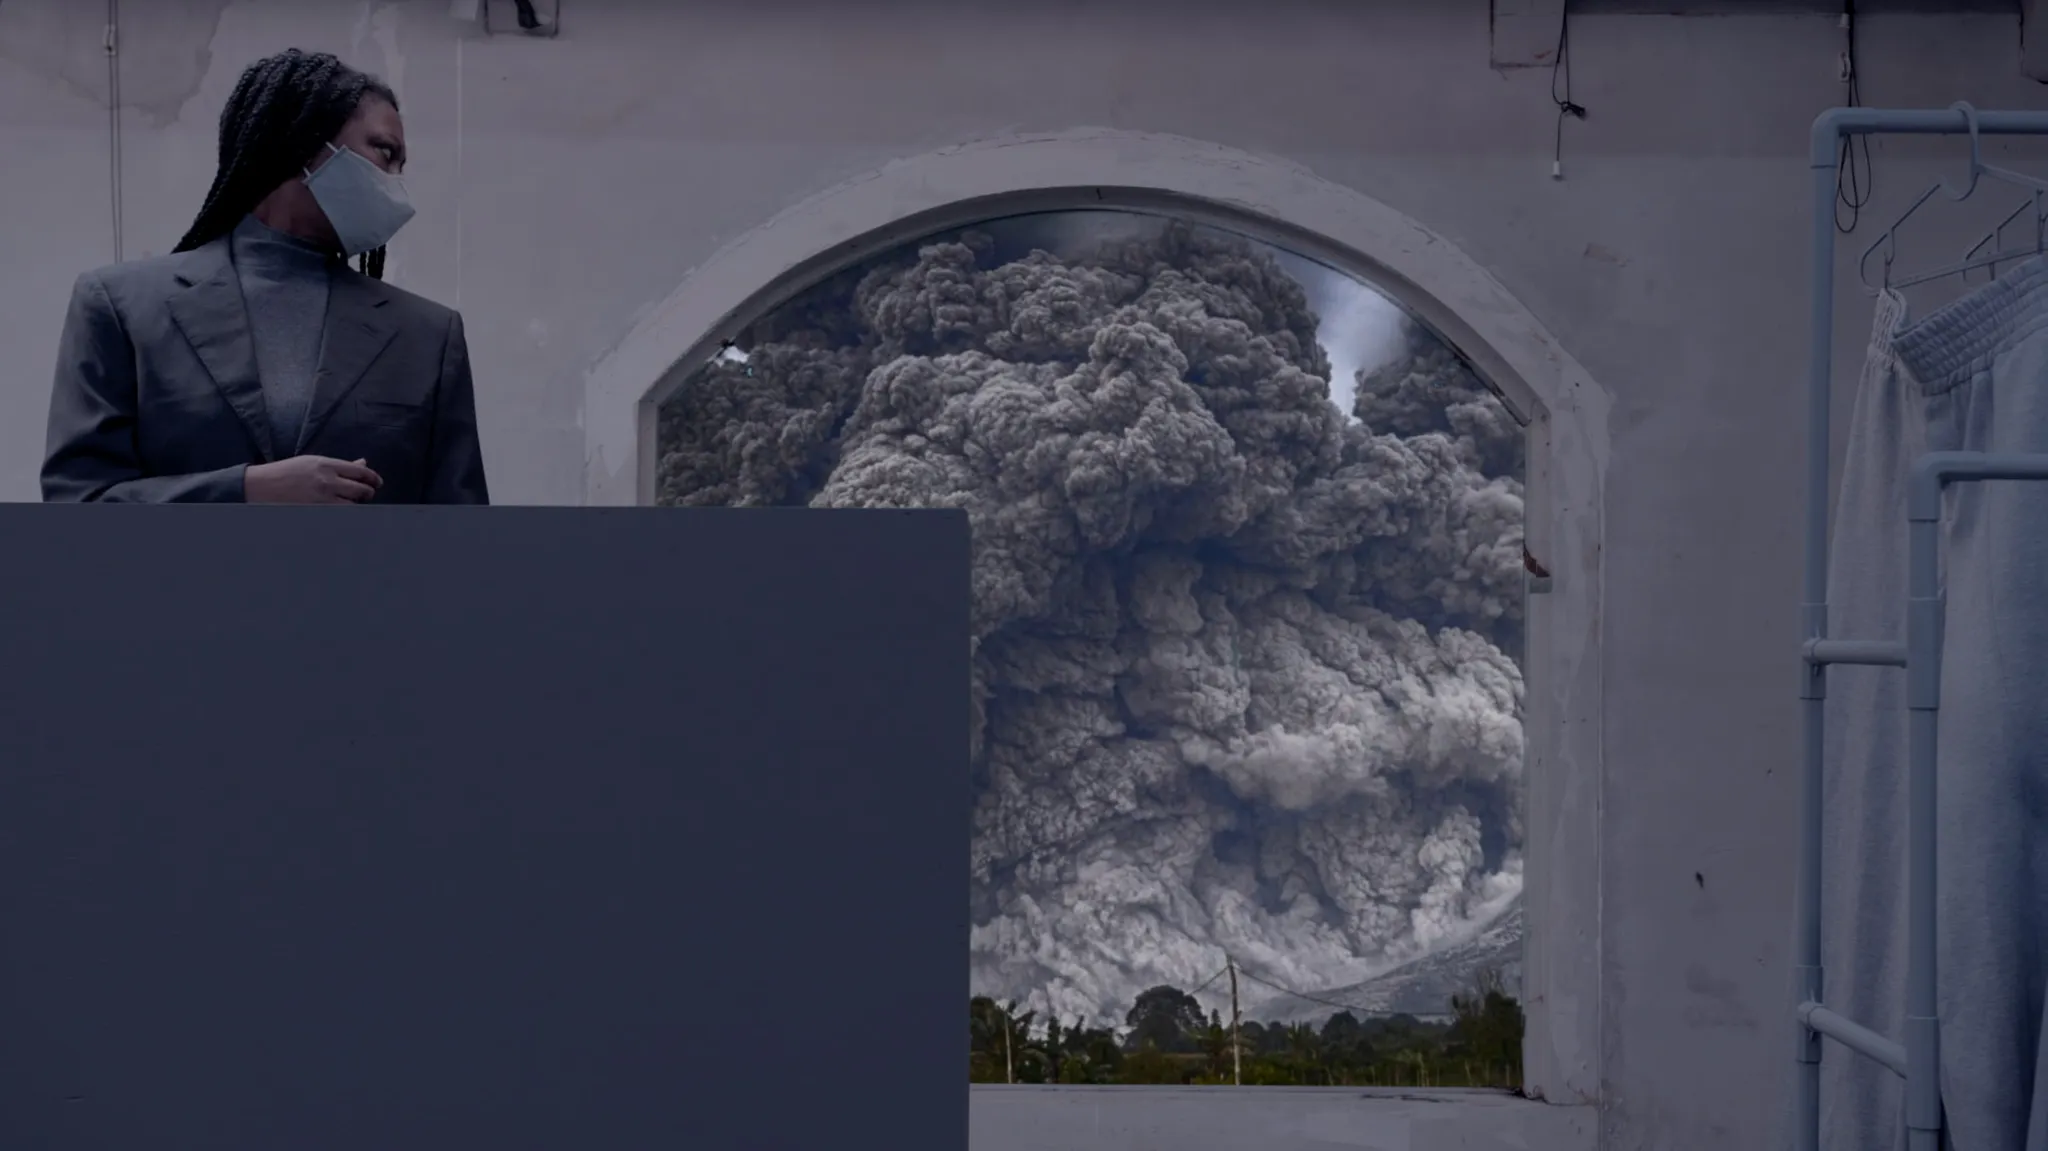 A character with black braids, attired in a sophisticated black suit and wearing a face mask, glances over their shoulder toward a window framing a landscape of catastrophic turmoil. The landscape features thick, volcano-like black smoke, setting a dramatic tone.